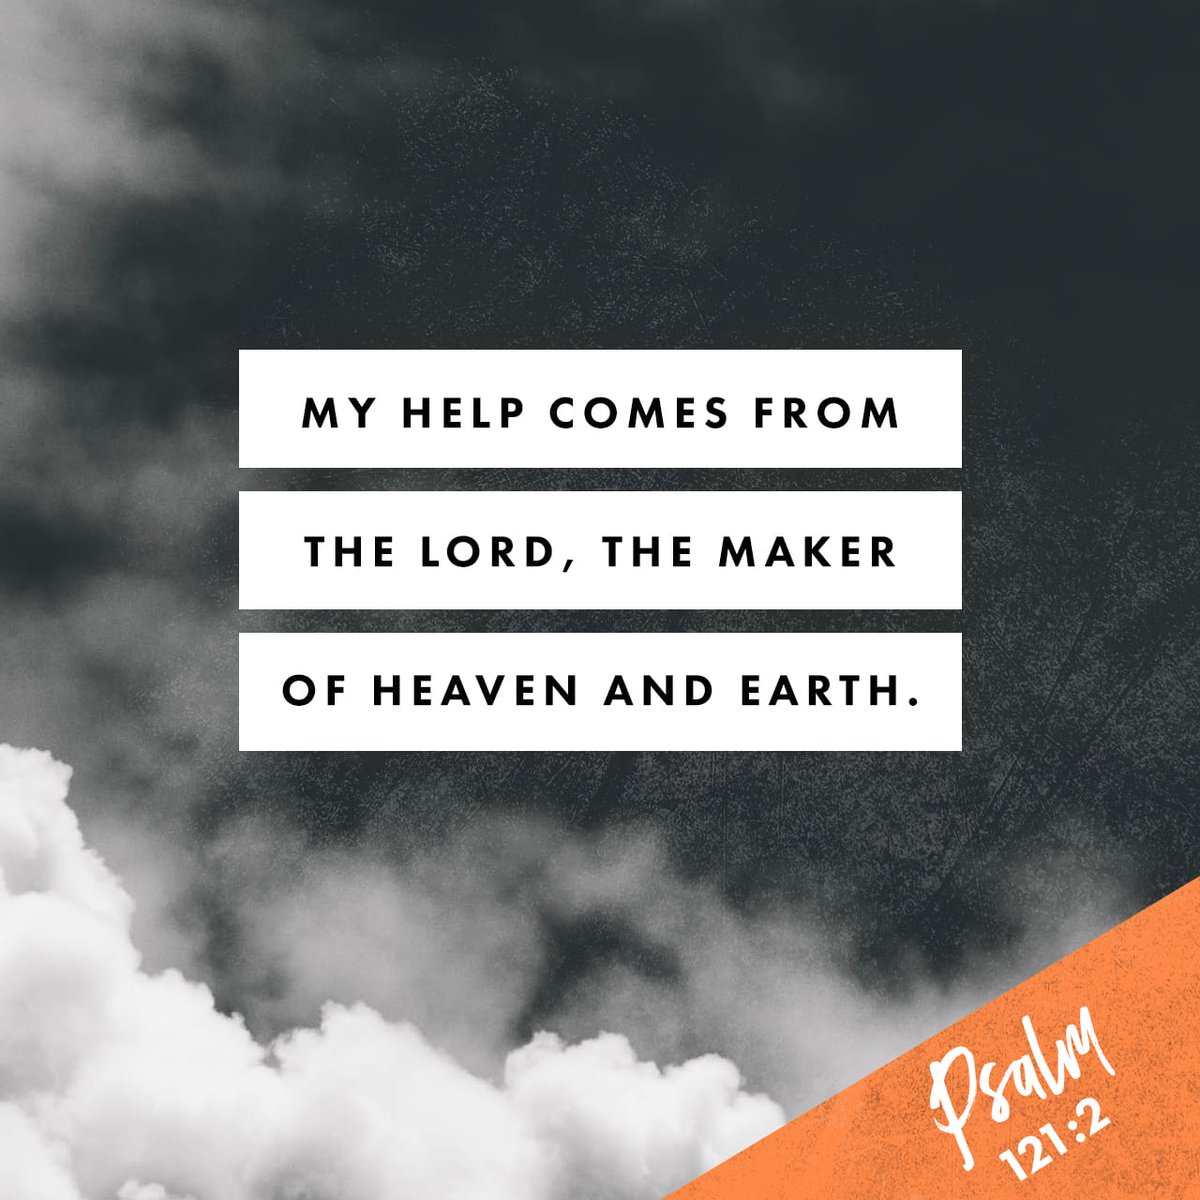 I will lift up mine eyes unto the hills, From whence cometh my help. My help cometh from the LORD, Which made heaven and earth. Psalm 121:1-2